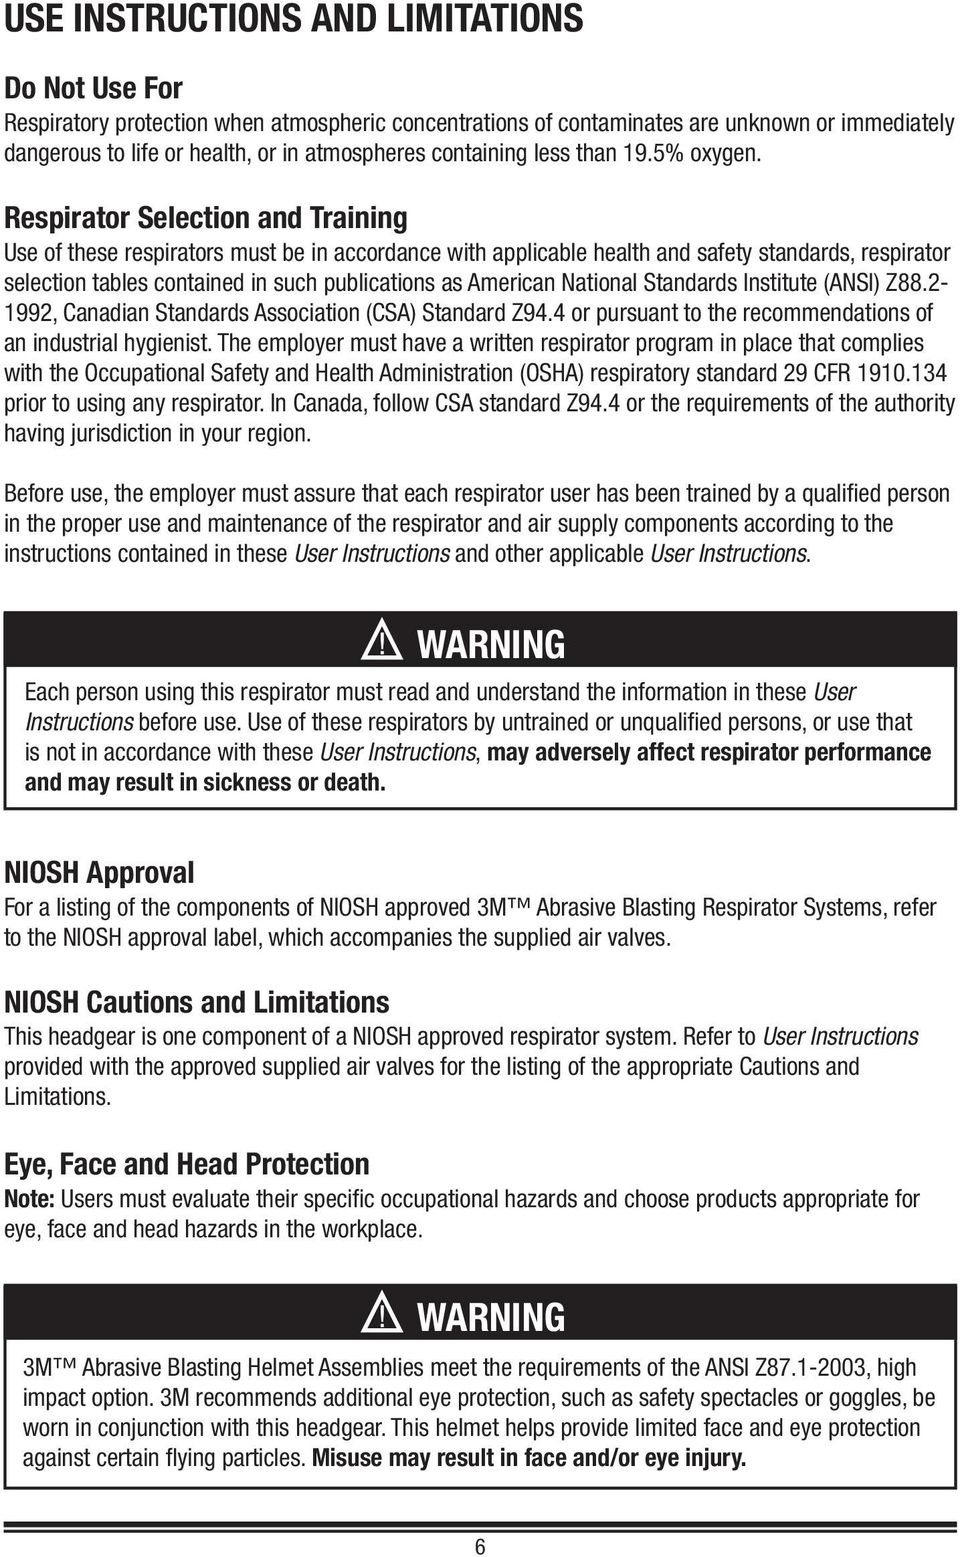 Respirator Selection and Training Use of these respirators must be in accordance with applicable health and safety standards, respirator selection tables contained in such publications as American